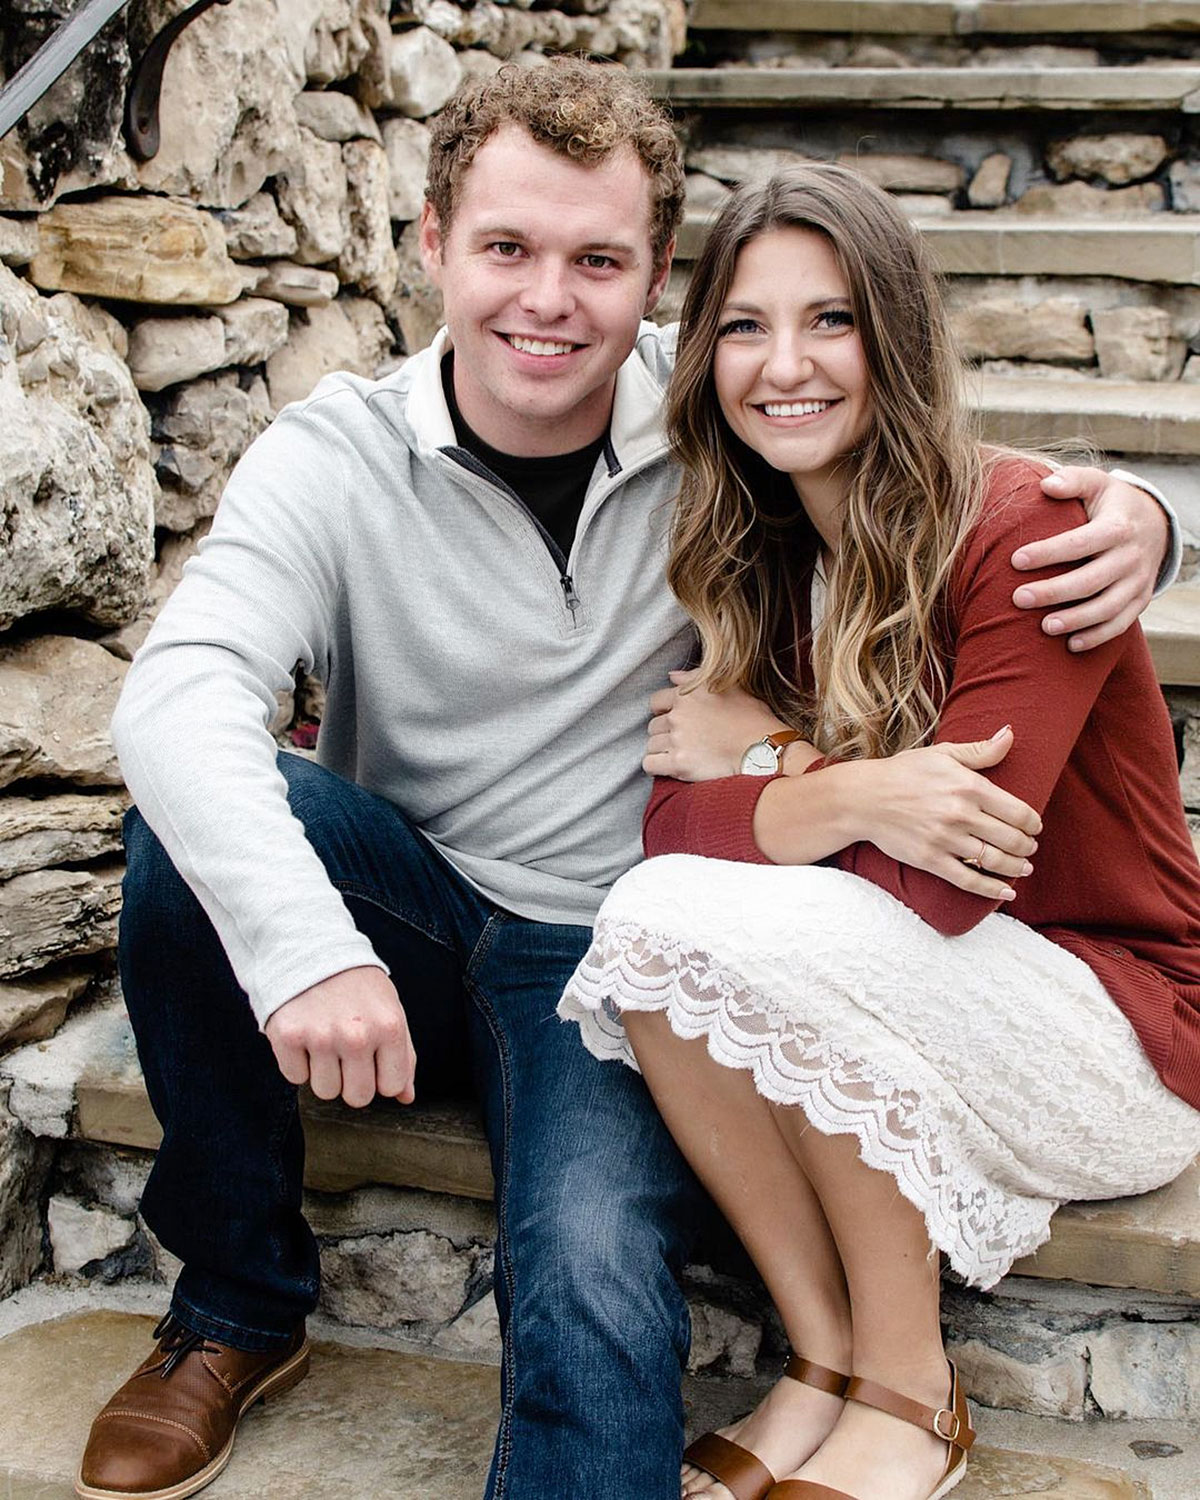 Michelle Duggar Trades In Her Skirt for Leggings at Reunion With